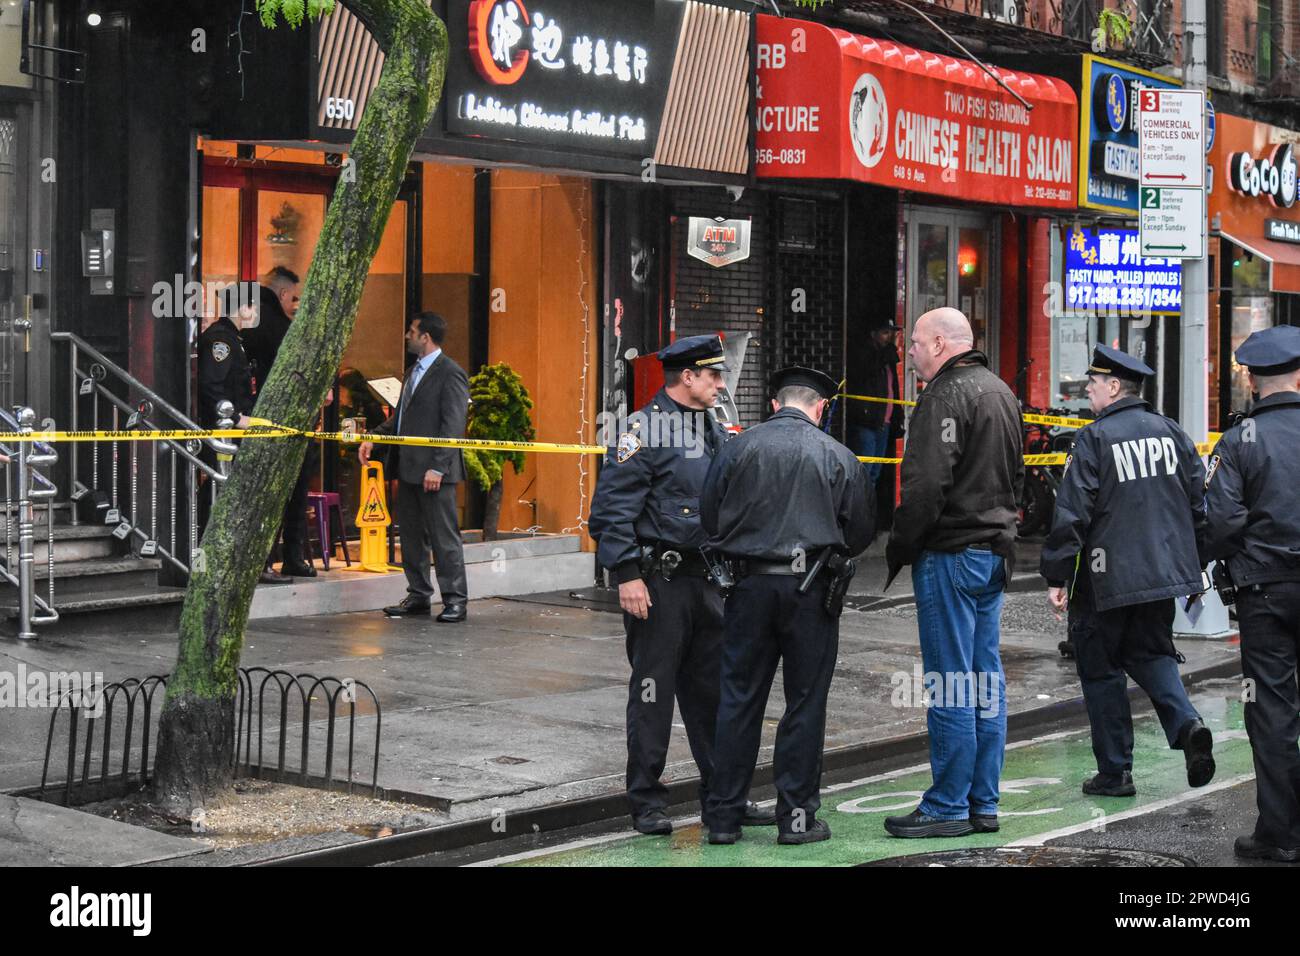 Manhattan, United States. 29th Apr, 2023. A man and police officers seen during the investigation. Police investigate the shooting incident. Shooting in Manhattan, New York, United States on April 29, 2023. At 17:43 Saturday evening one person was shot in the hip and shoulder near the area of 9th Avenue and West 46th Street. According to the New York City Police Department, the person shot is in stable condition. No suspects are captured at this time. (Photo by Kyle Mazza/SOPA Images/Sipa USA) Credit: Sipa USA/Alamy Live News Stock Photo